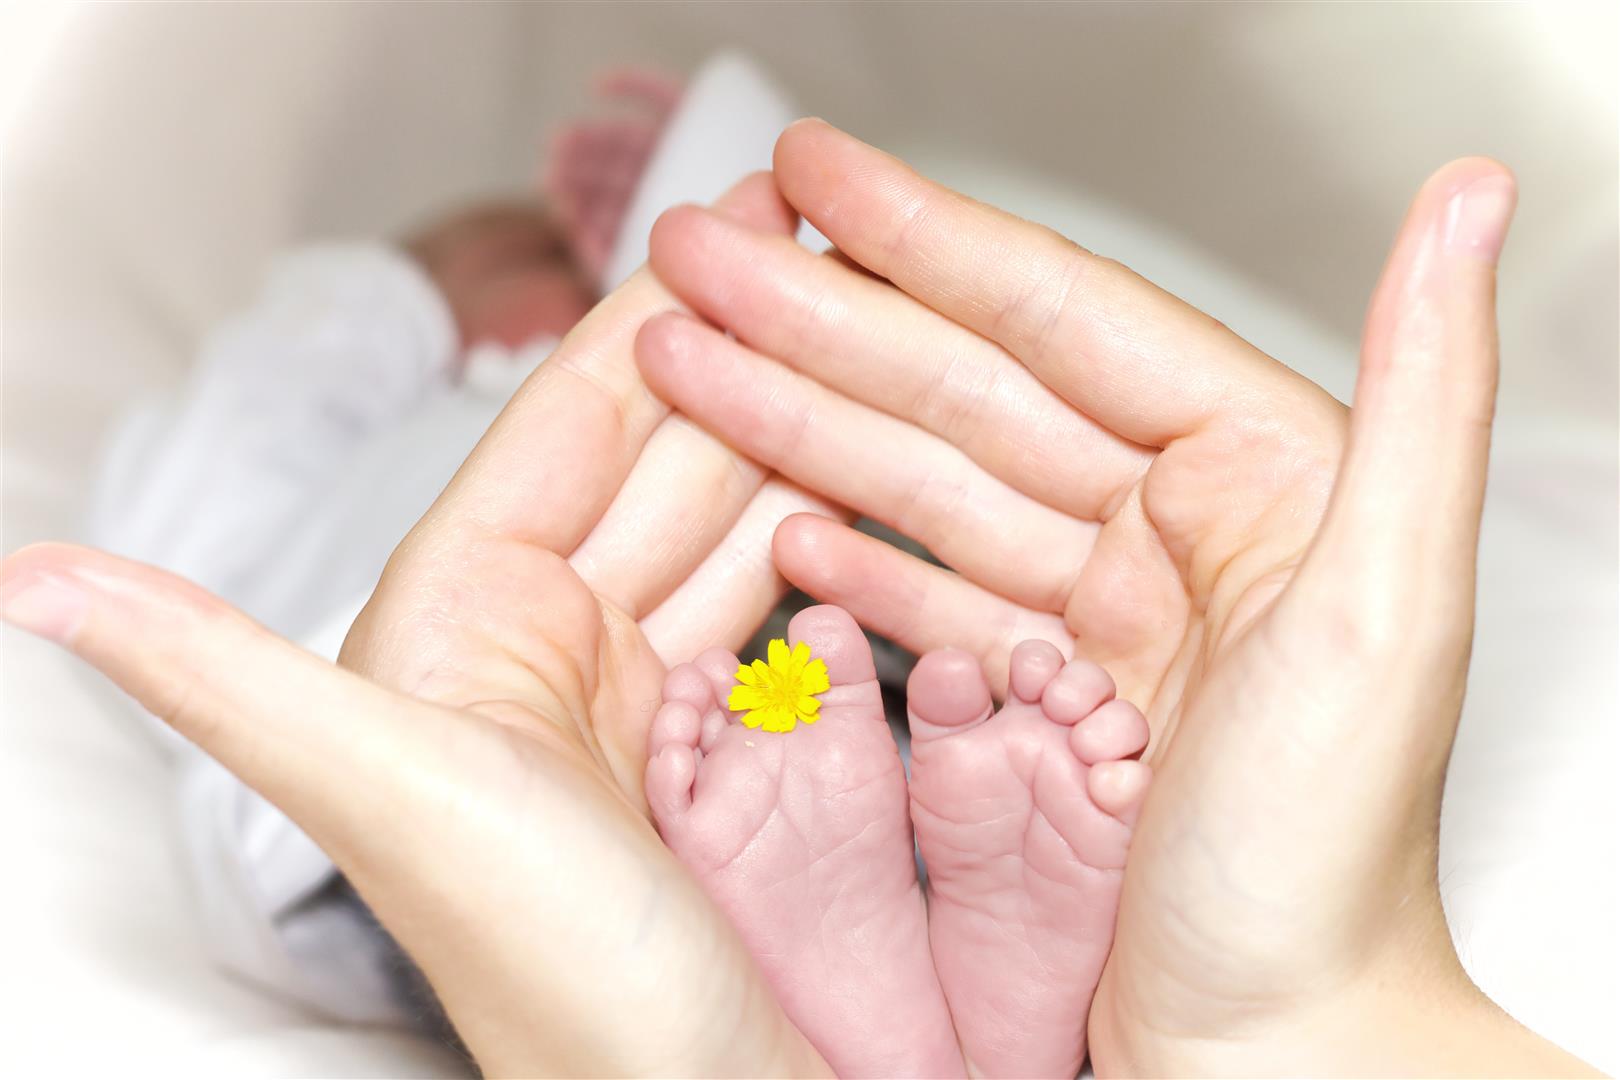 A child's feet clasp in parents hands